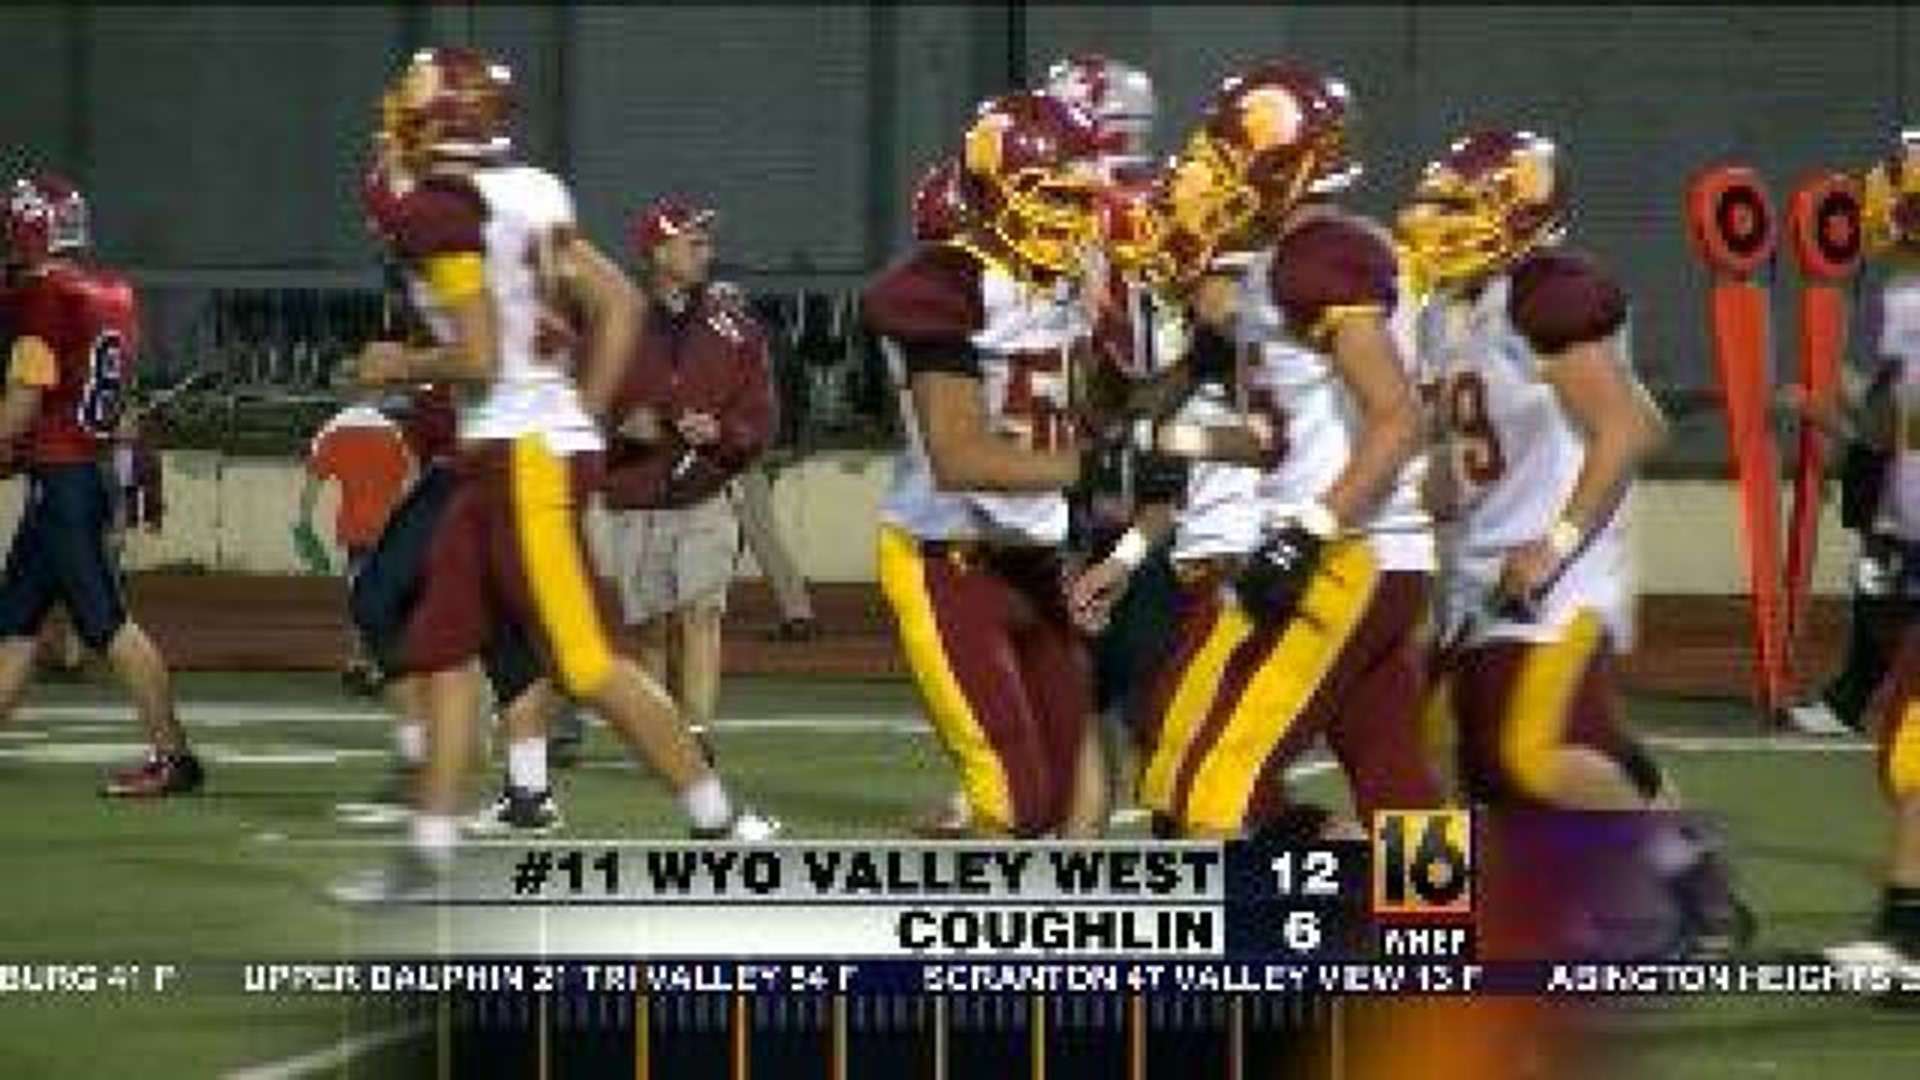 Wyoming Valley West vs. Coughlin